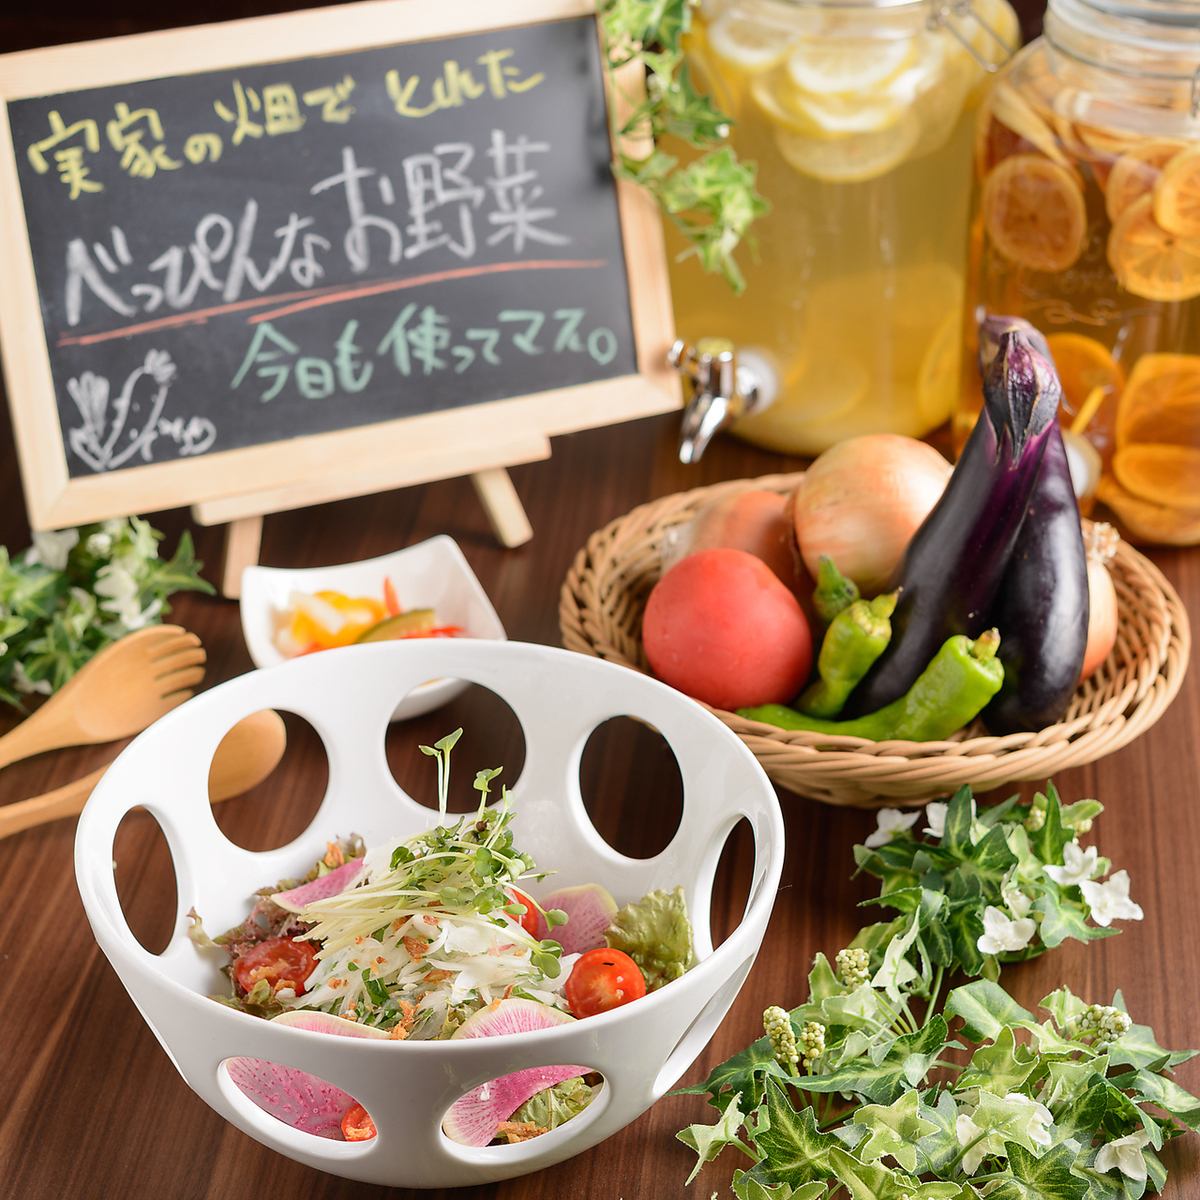 Providing healthy and safe food using home grown vegetables and ingredients from the central market ♪